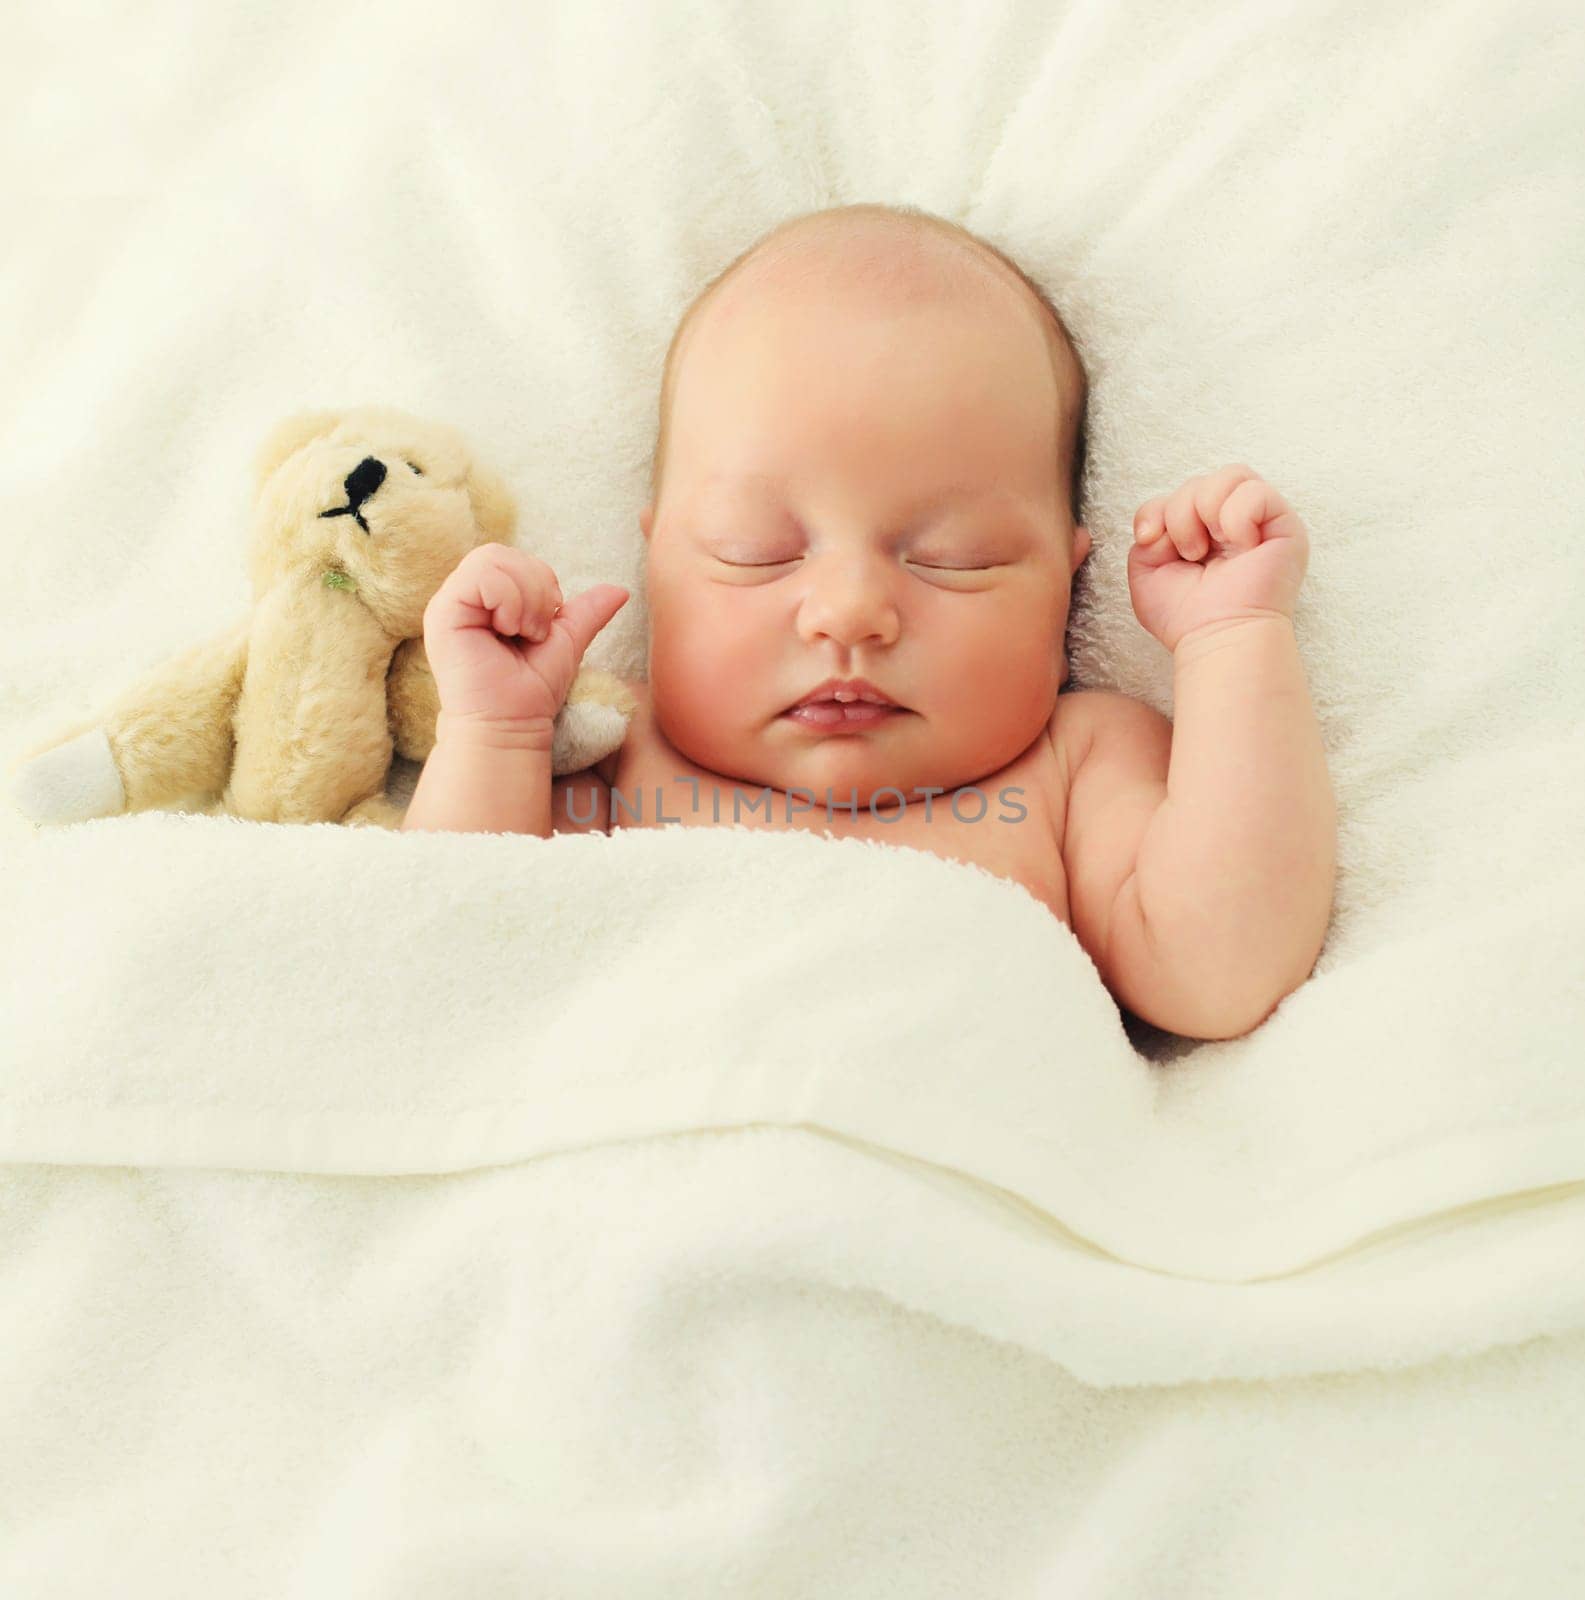 Portrait of infant sweet sleeping with teddy bear toy lying under blanket together on bed at home